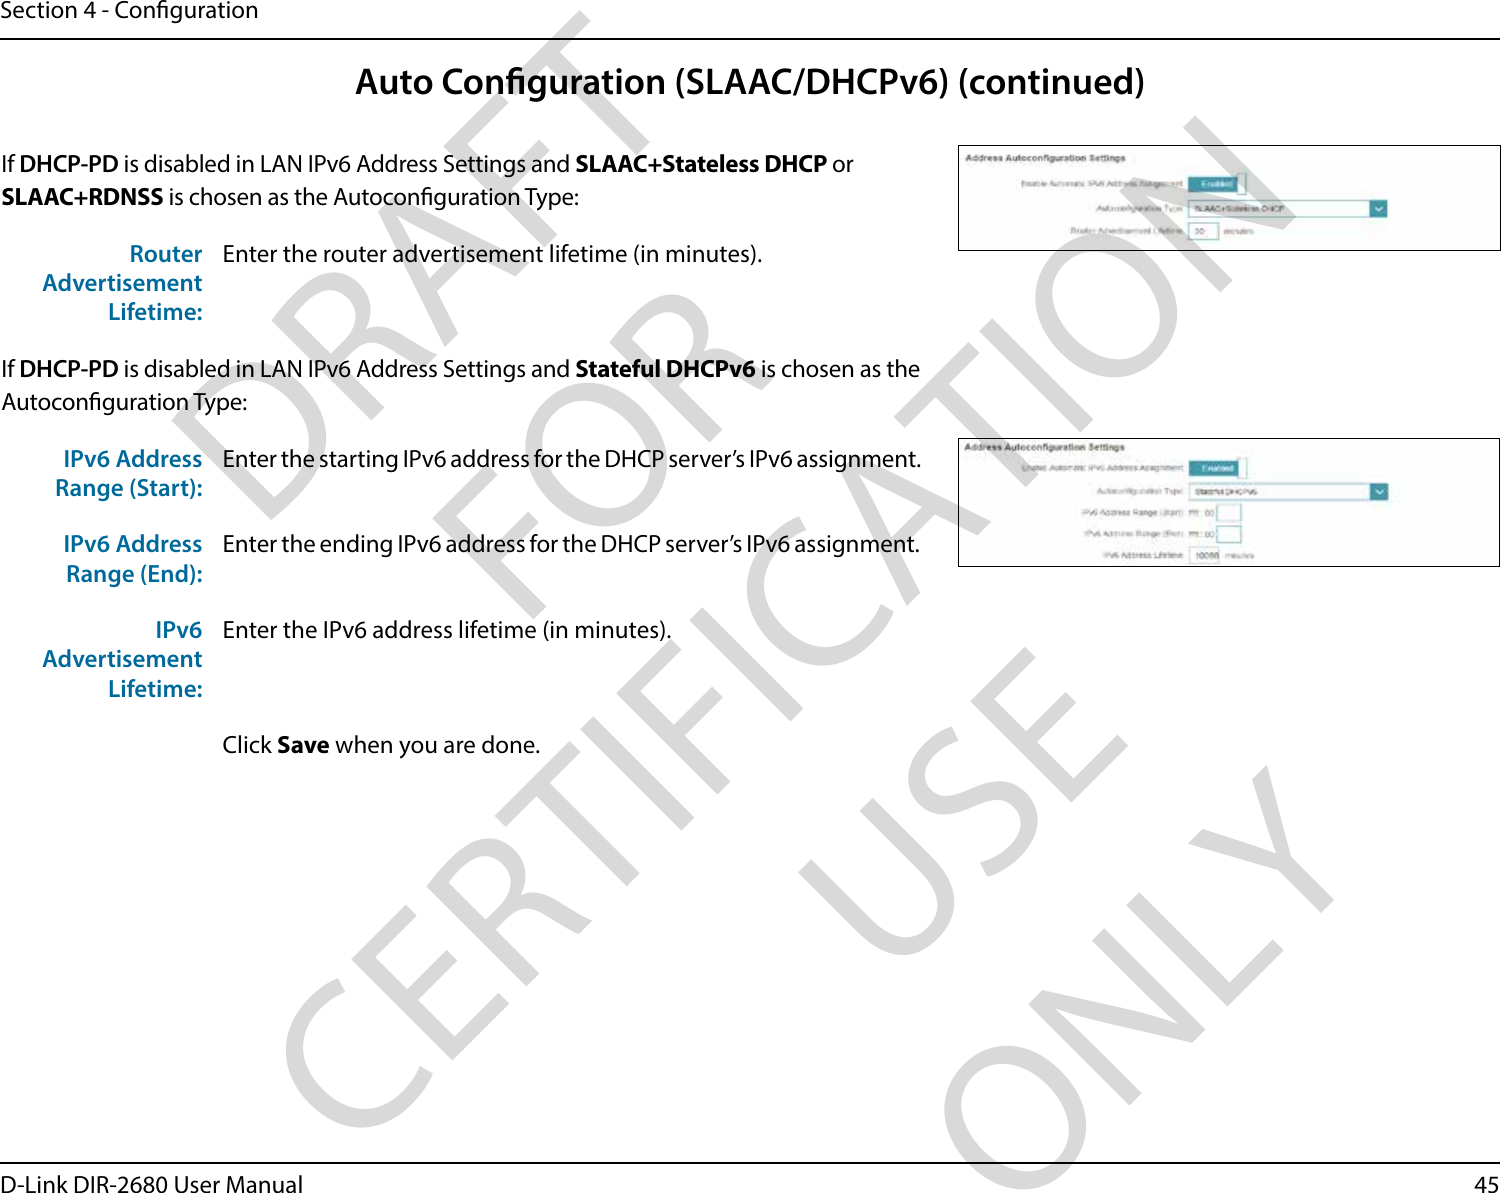 45D-Link DIR-2680 User ManualSection 4 - CongurationAuto Conguration (SLAAC/DHCPv6) (continued)If DHCP-PD is disabled in LAN IPv6 Address Settings and SLAAC+Stateless DHCP or SLAAC+RDNSS is chosen as the Autoconguration Type:Router Advertisement Lifetime:Enter the router advertisement lifetime (in minutes).If DHCP-PD is disabled in LAN IPv6 Address Settings and Stateful DHCPv6 is chosen as the Autoconguration Type:IPv6 Address Range (Start):Enter the starting IPv6 address for the DHCP server’s IPv6 assignment.IPv6 Address Range (End):Enter the ending IPv6 address for the DHCP server’s IPv6 assignment.IPv6 Advertisement Lifetime:Enter the IPv6 address lifetime (in minutes).Click Save when you are done.DRAFT FOR CERTIFICATION USE ONLY